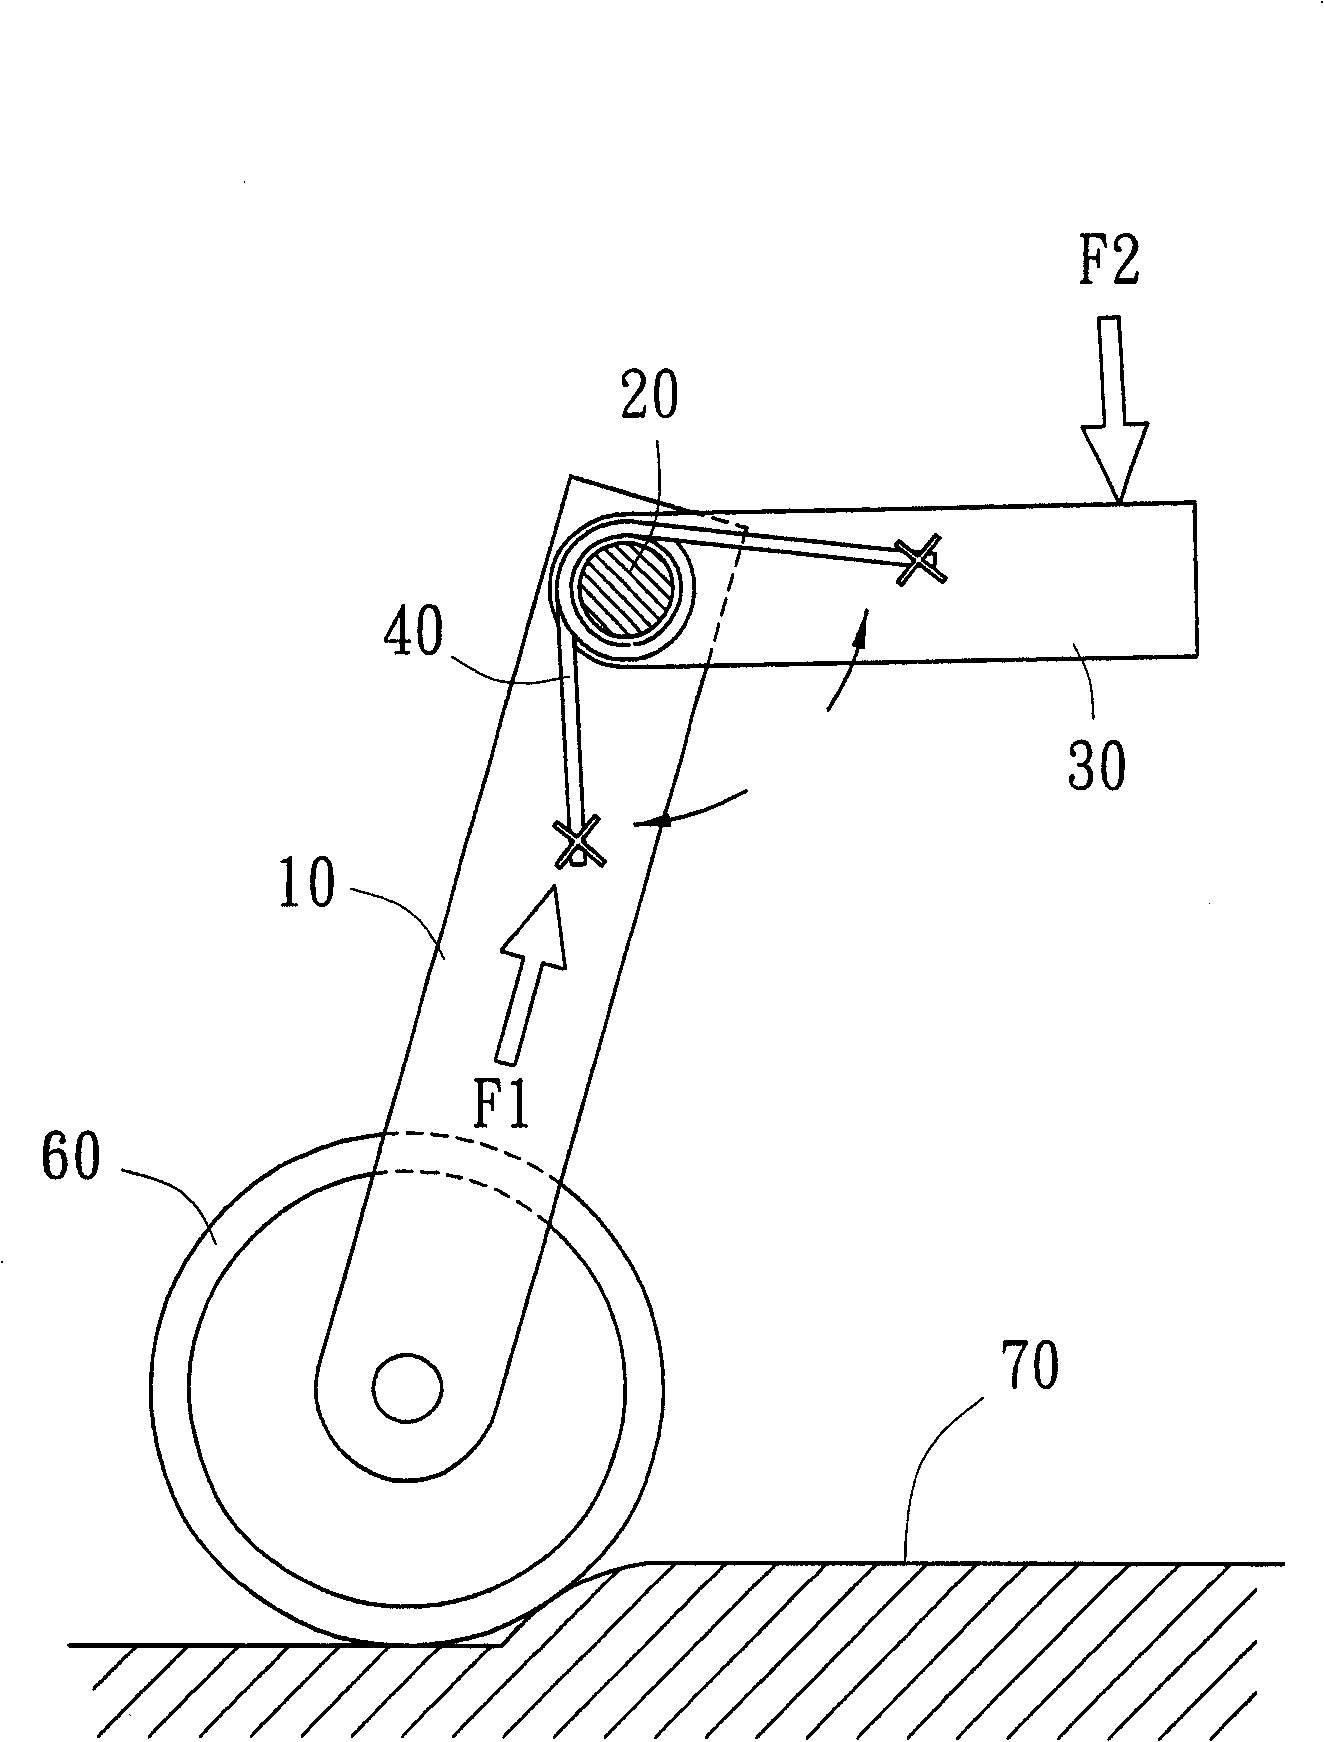 Anti-vibration system and device for bicycle steering tube